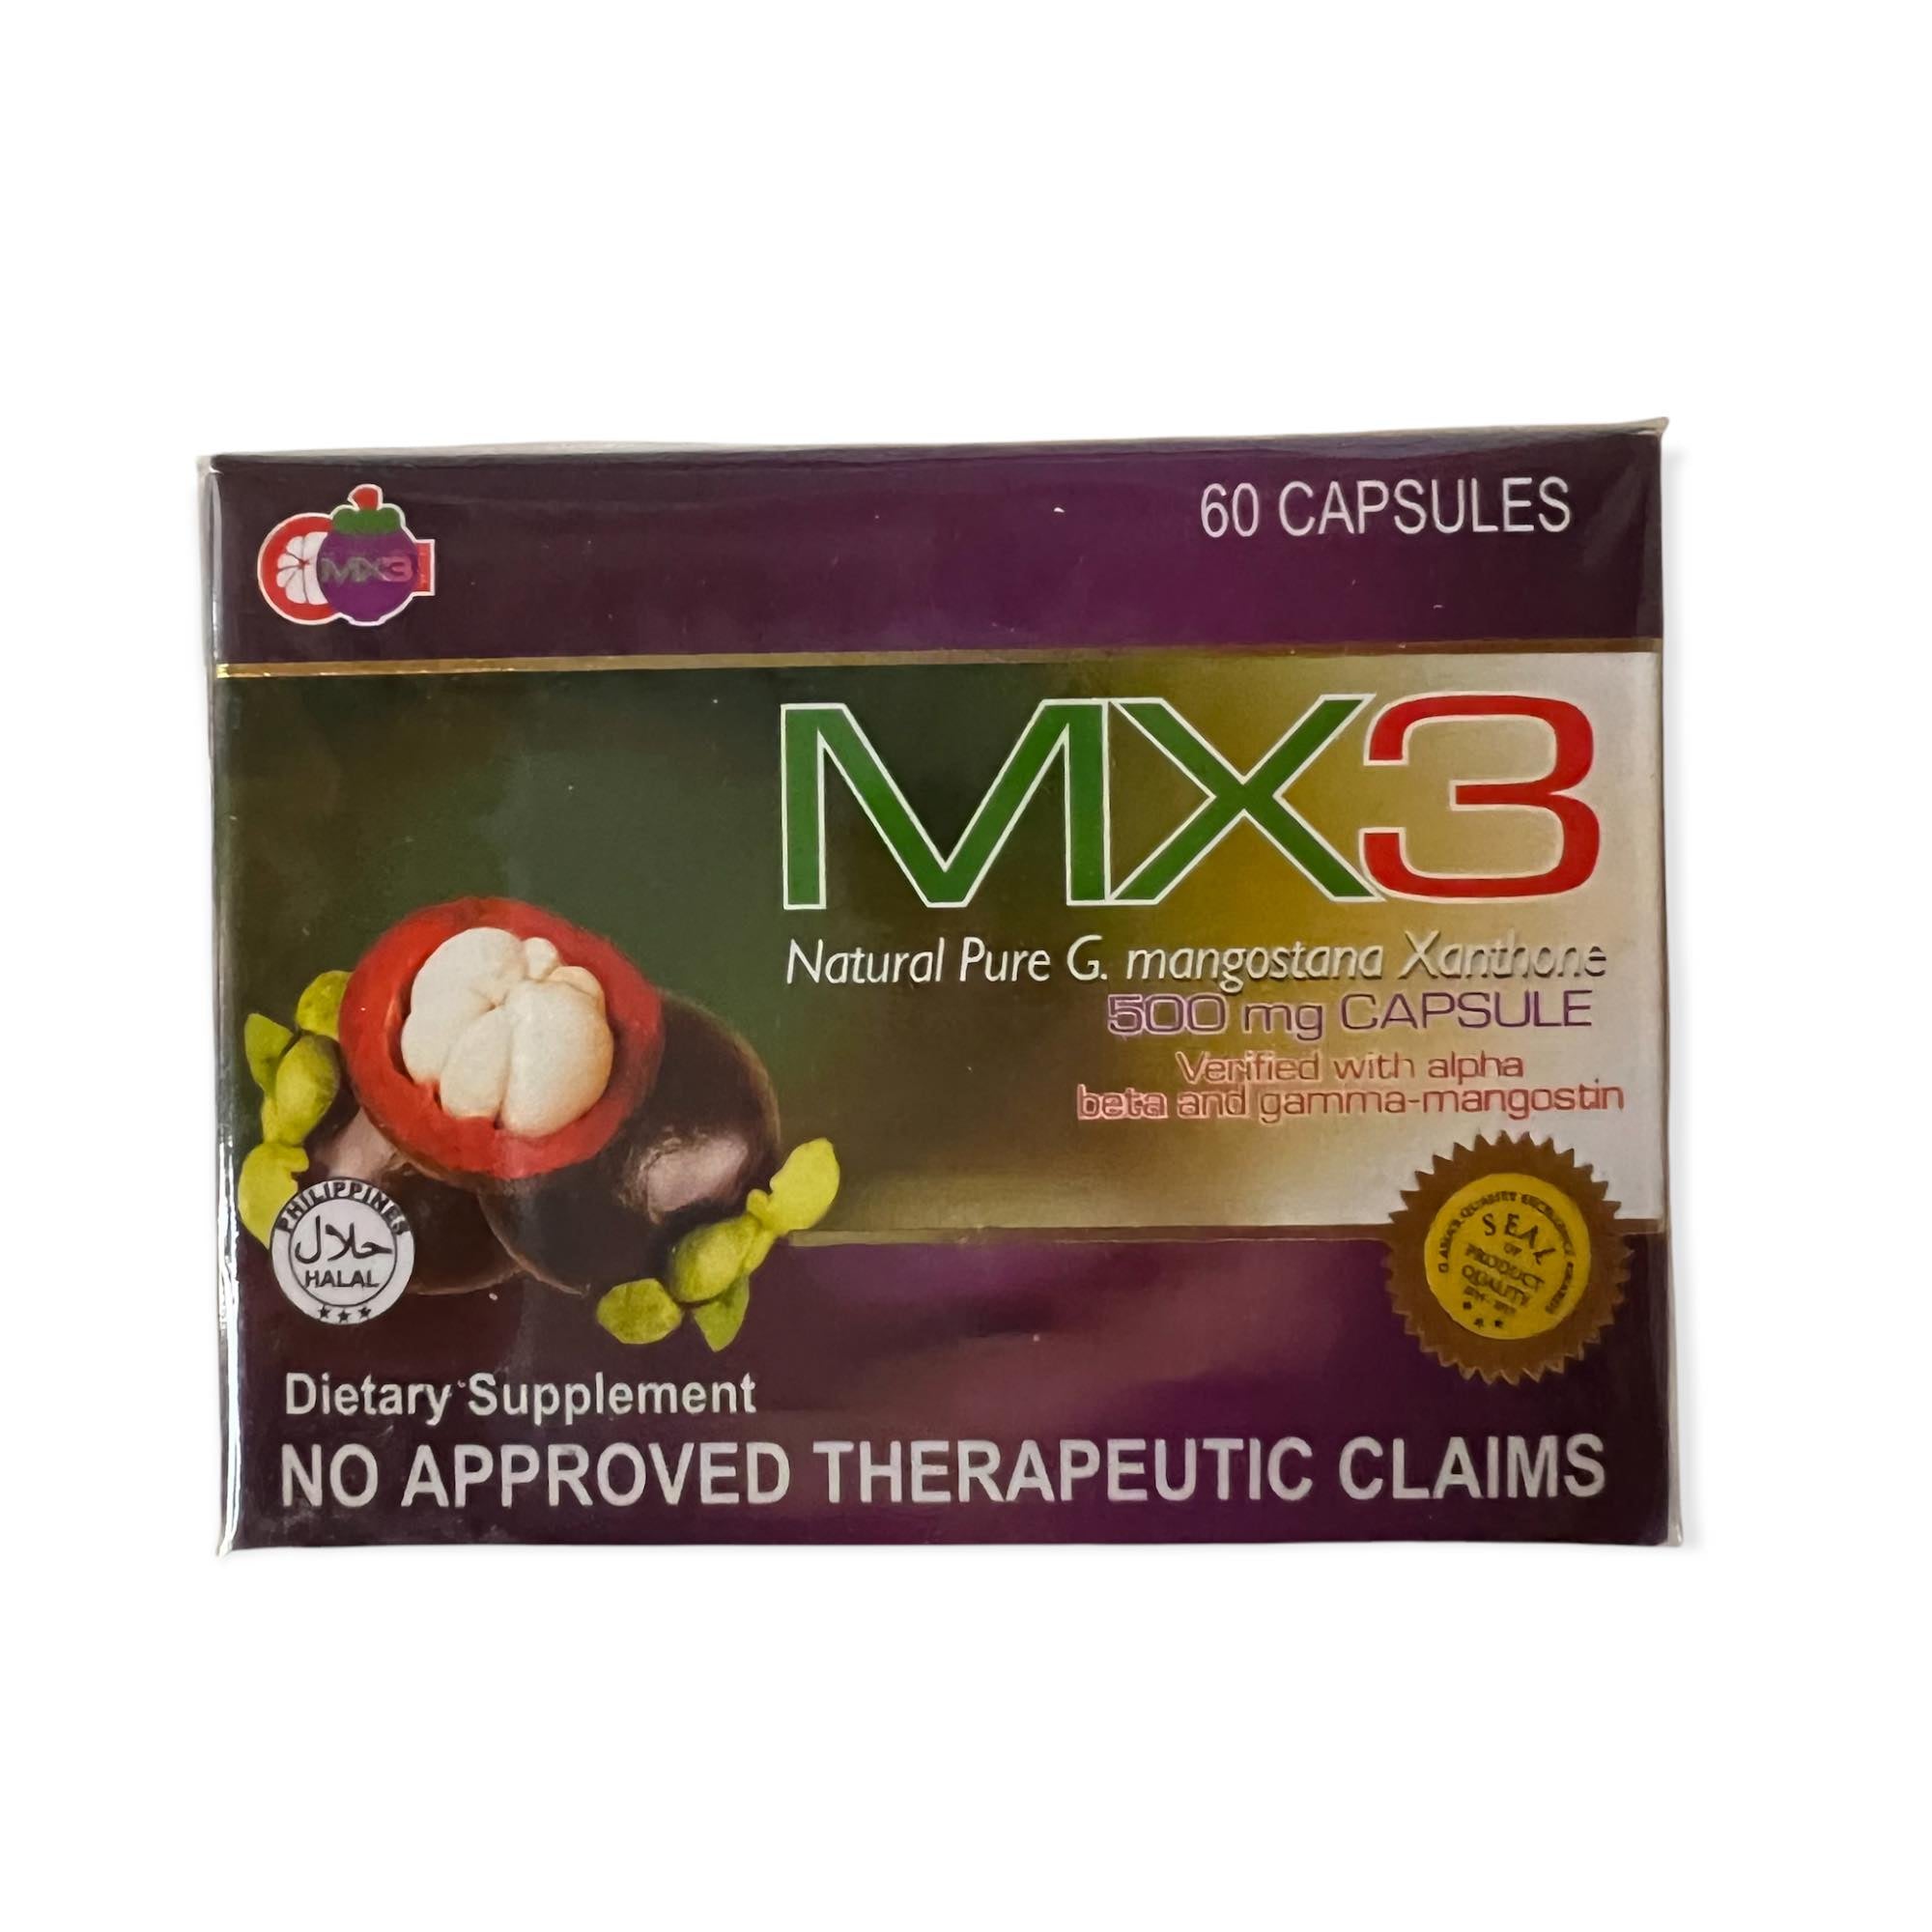 MX3 Plus - Mangosteen 500mg Capsule with L- Carnitine - 60 Capsules